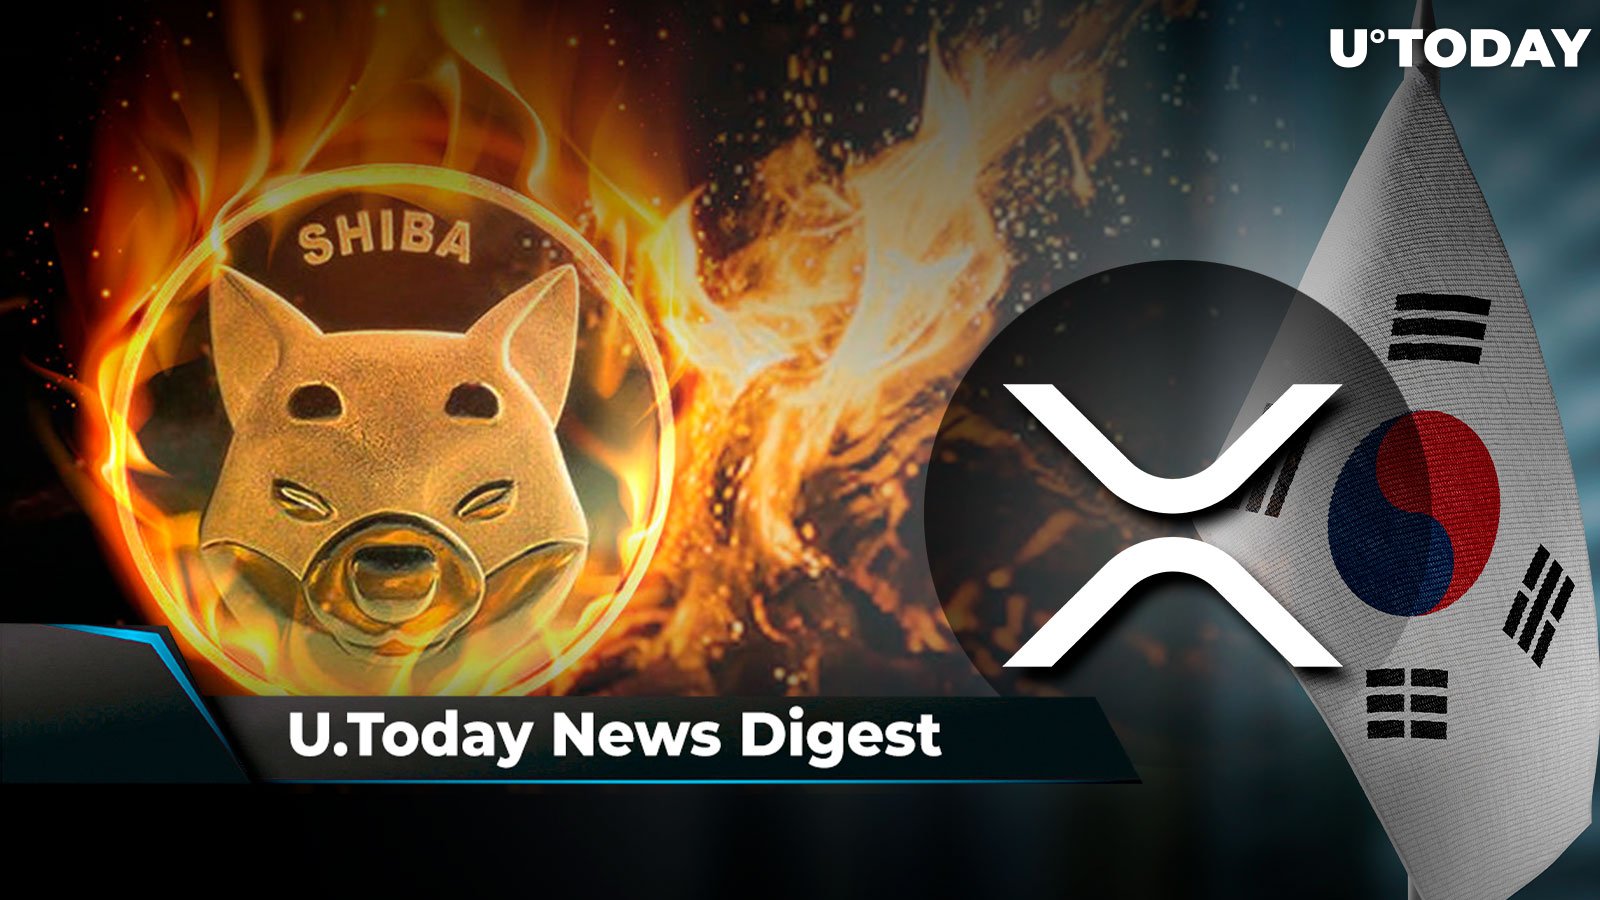 SHIB Army Excited by Shibarium Burning 70% of Base Fee, XRP Top Trading Token on Korea’s Exchanges, SHIB Lead Bonds with Japan’s SHIB Fans: Crypto News Digest by U.Today